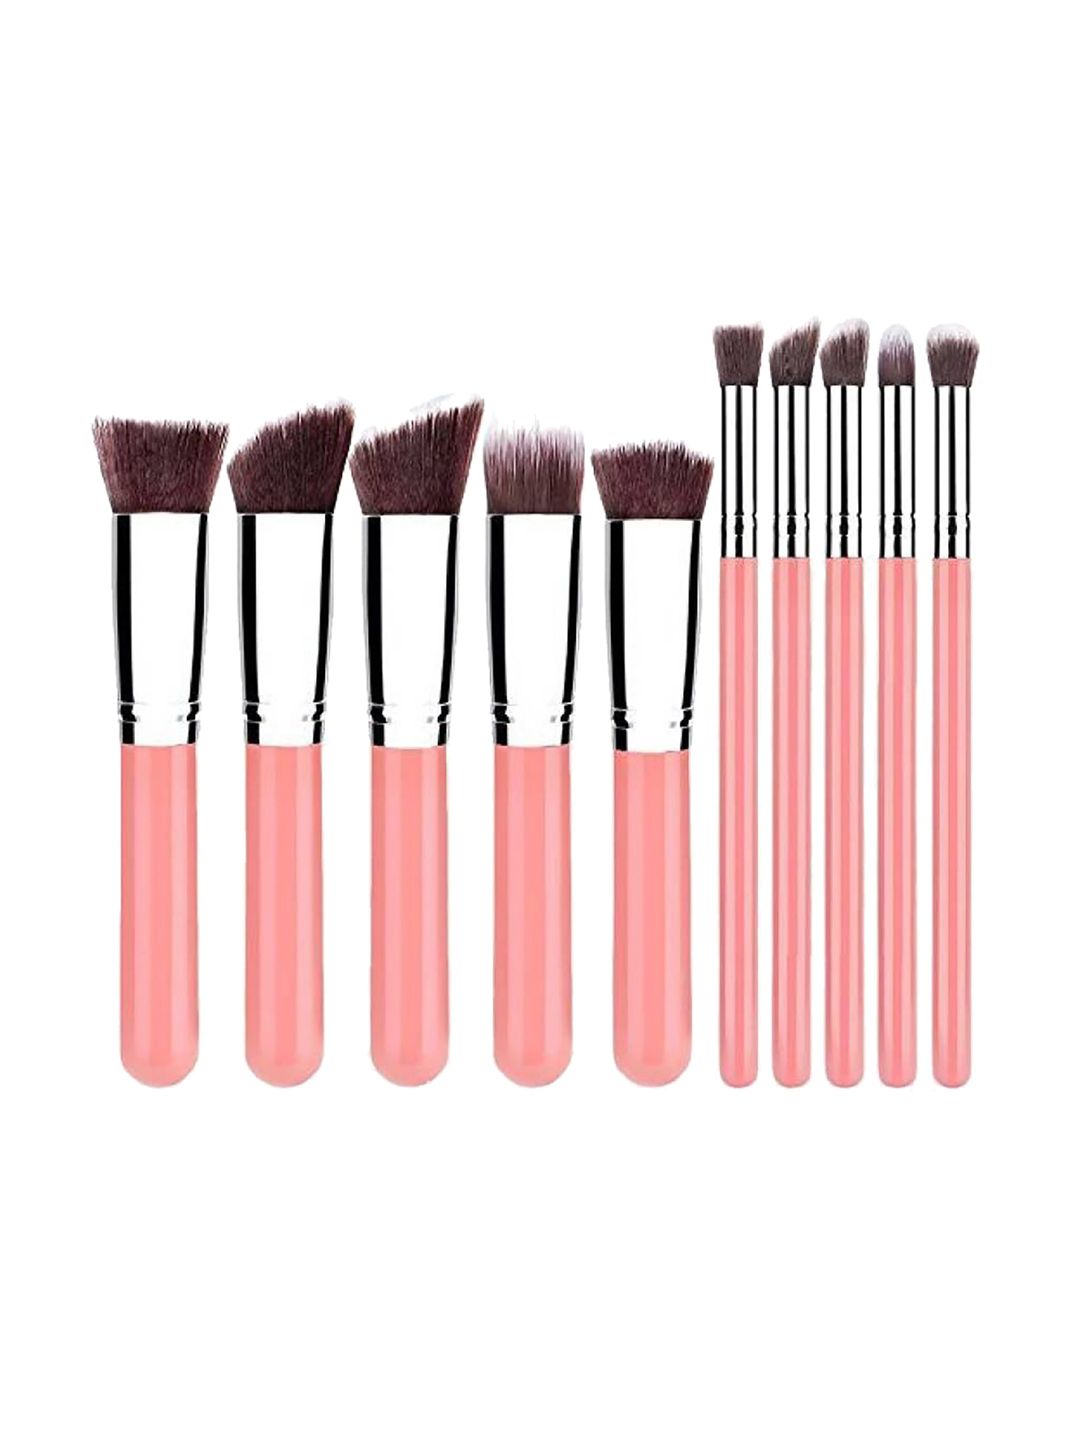 Ronzille Set Of 10 Pink Soft Makeup Brushes Price in India